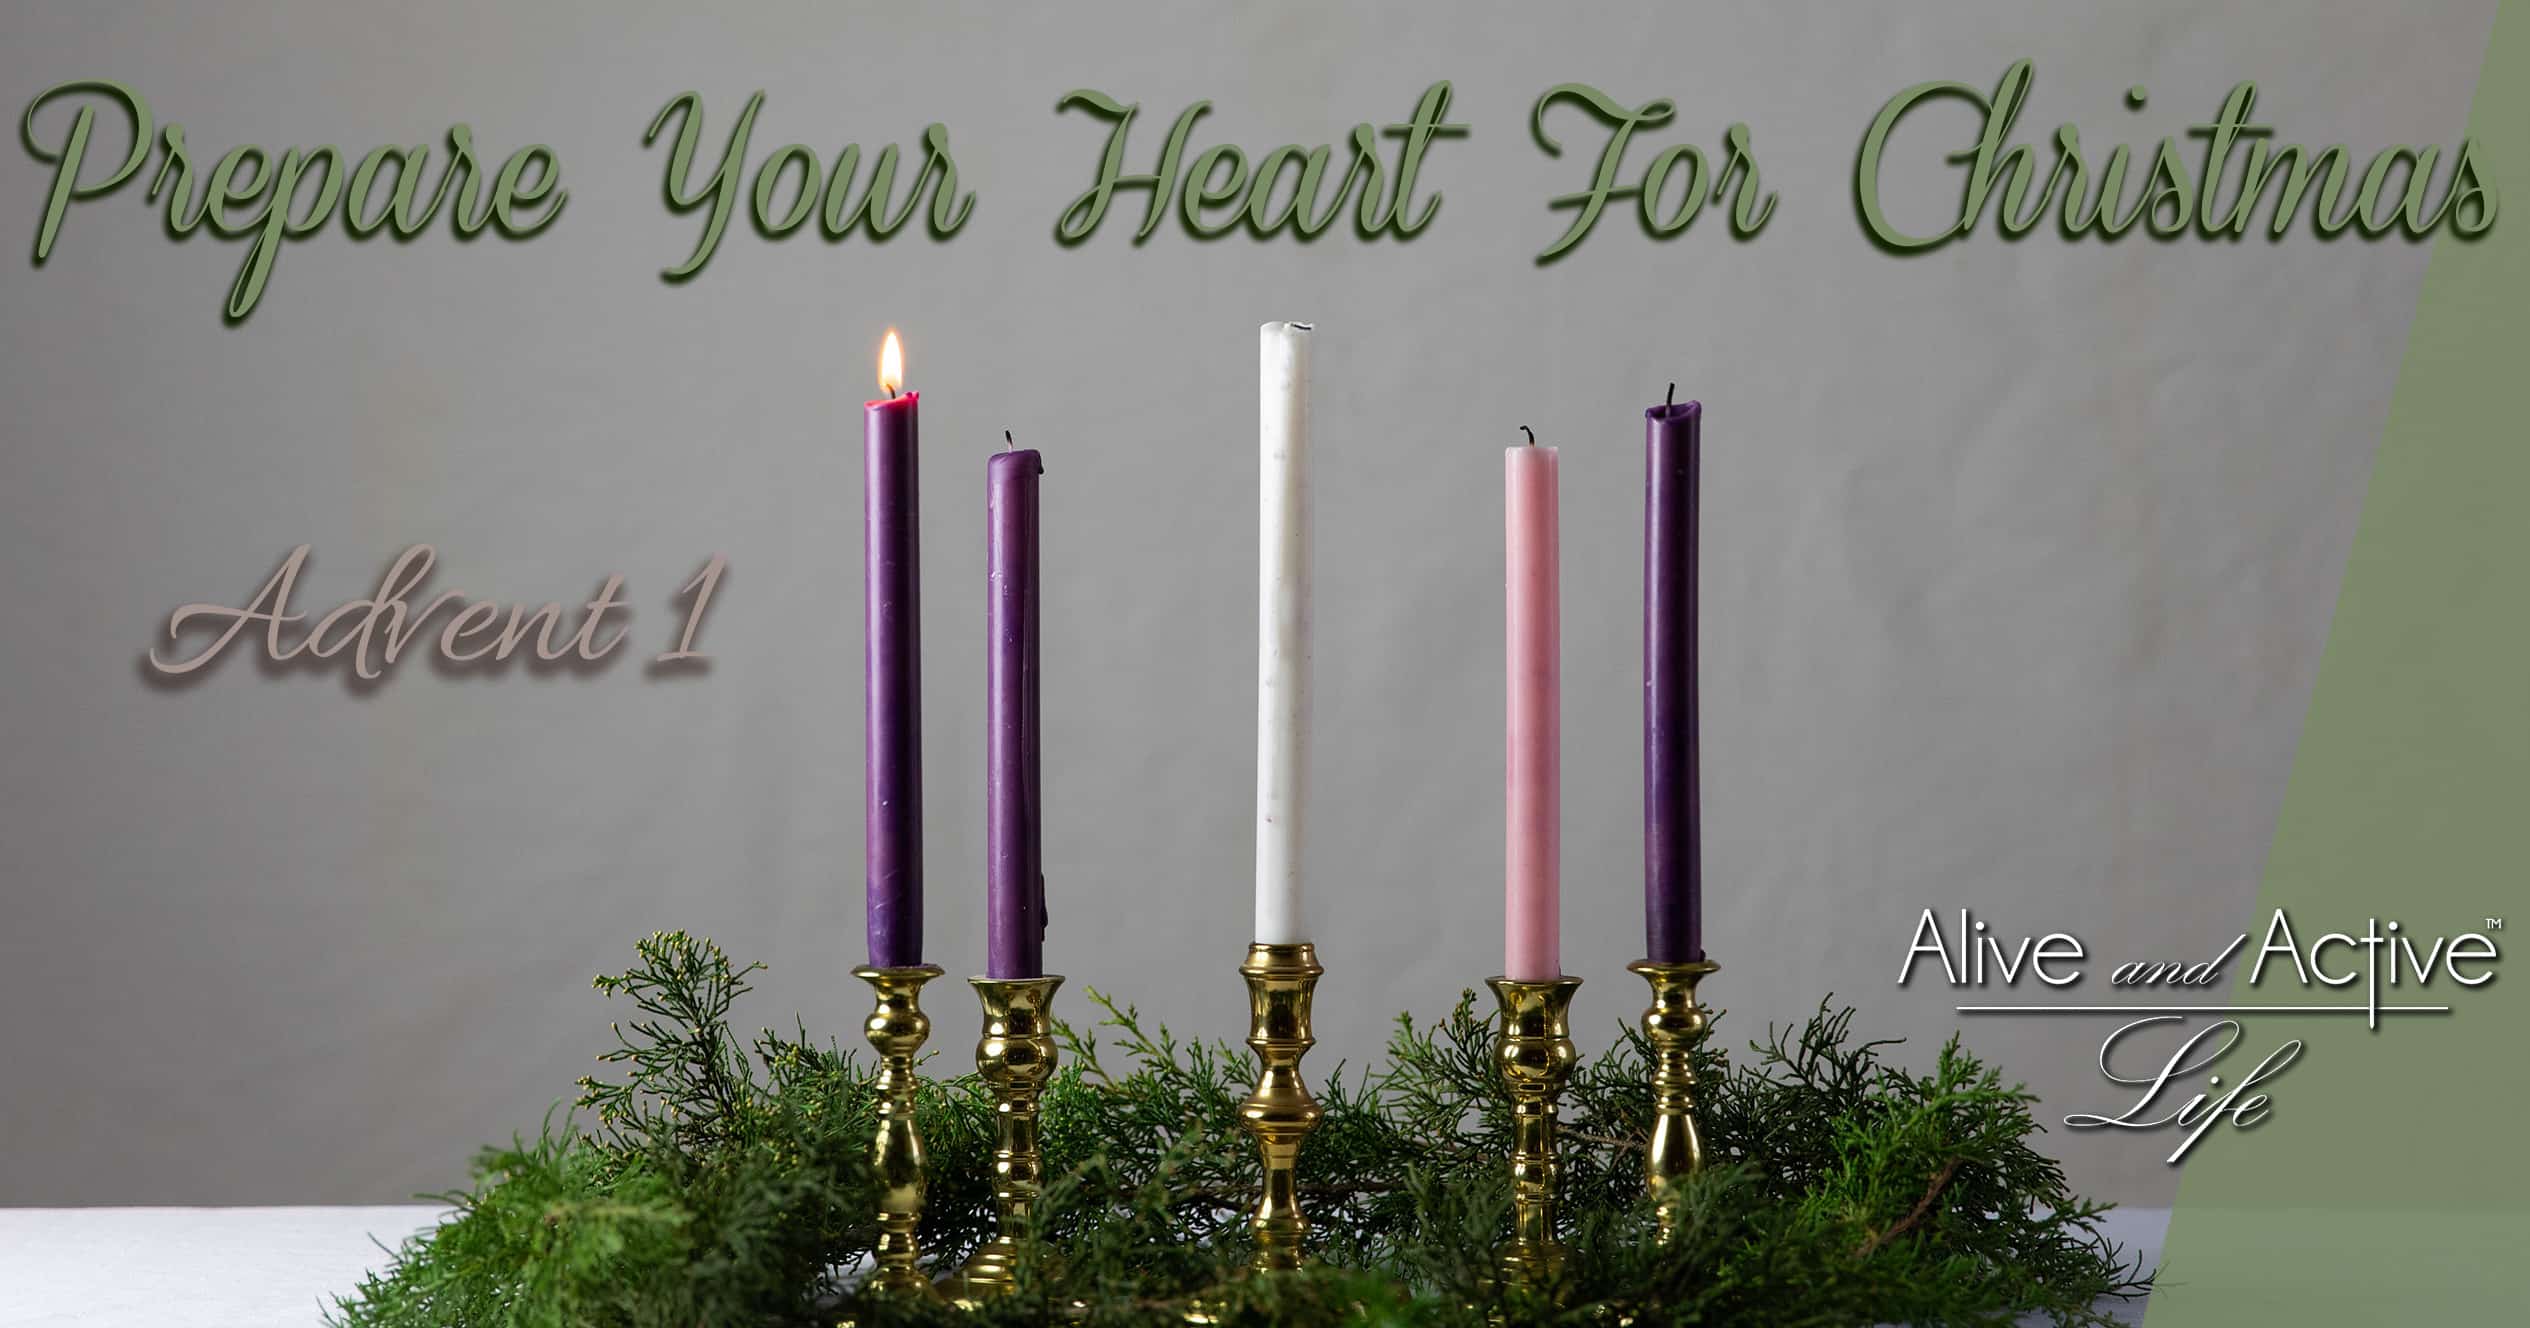 Prepare Your Heart For Christmas – Advent #1